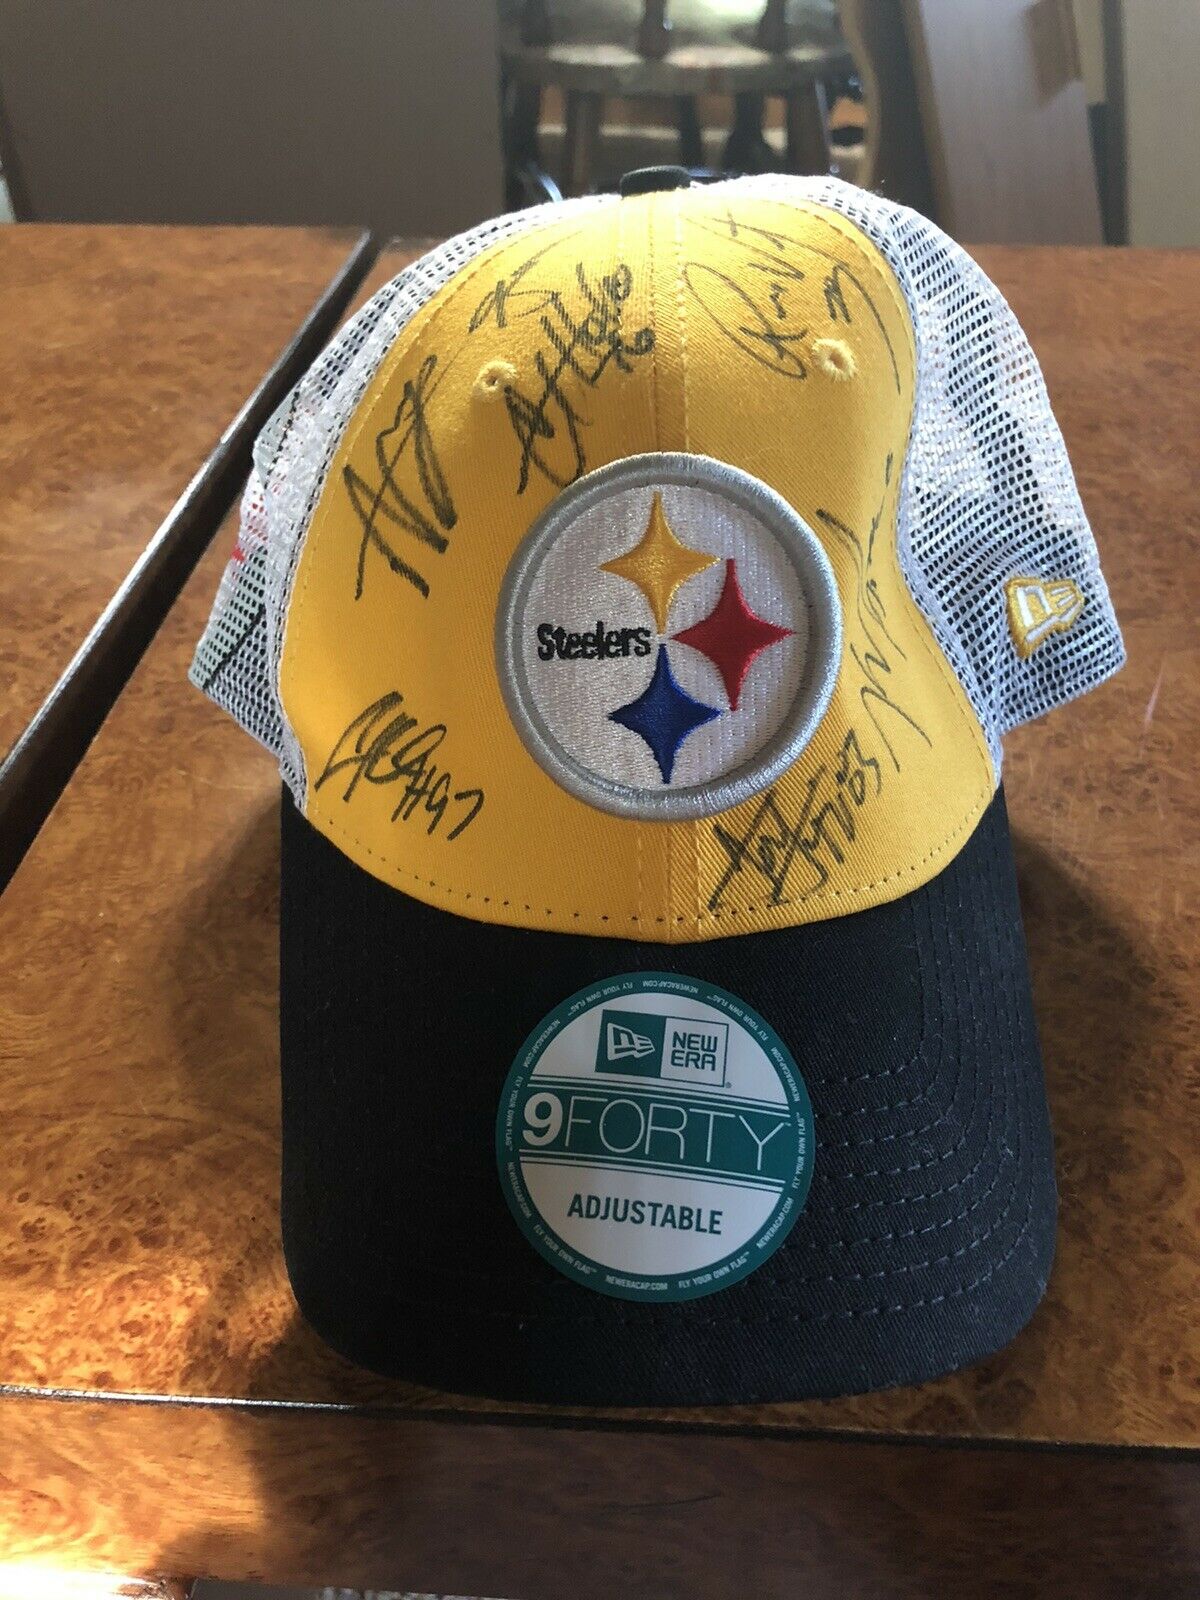 Autographed football hat